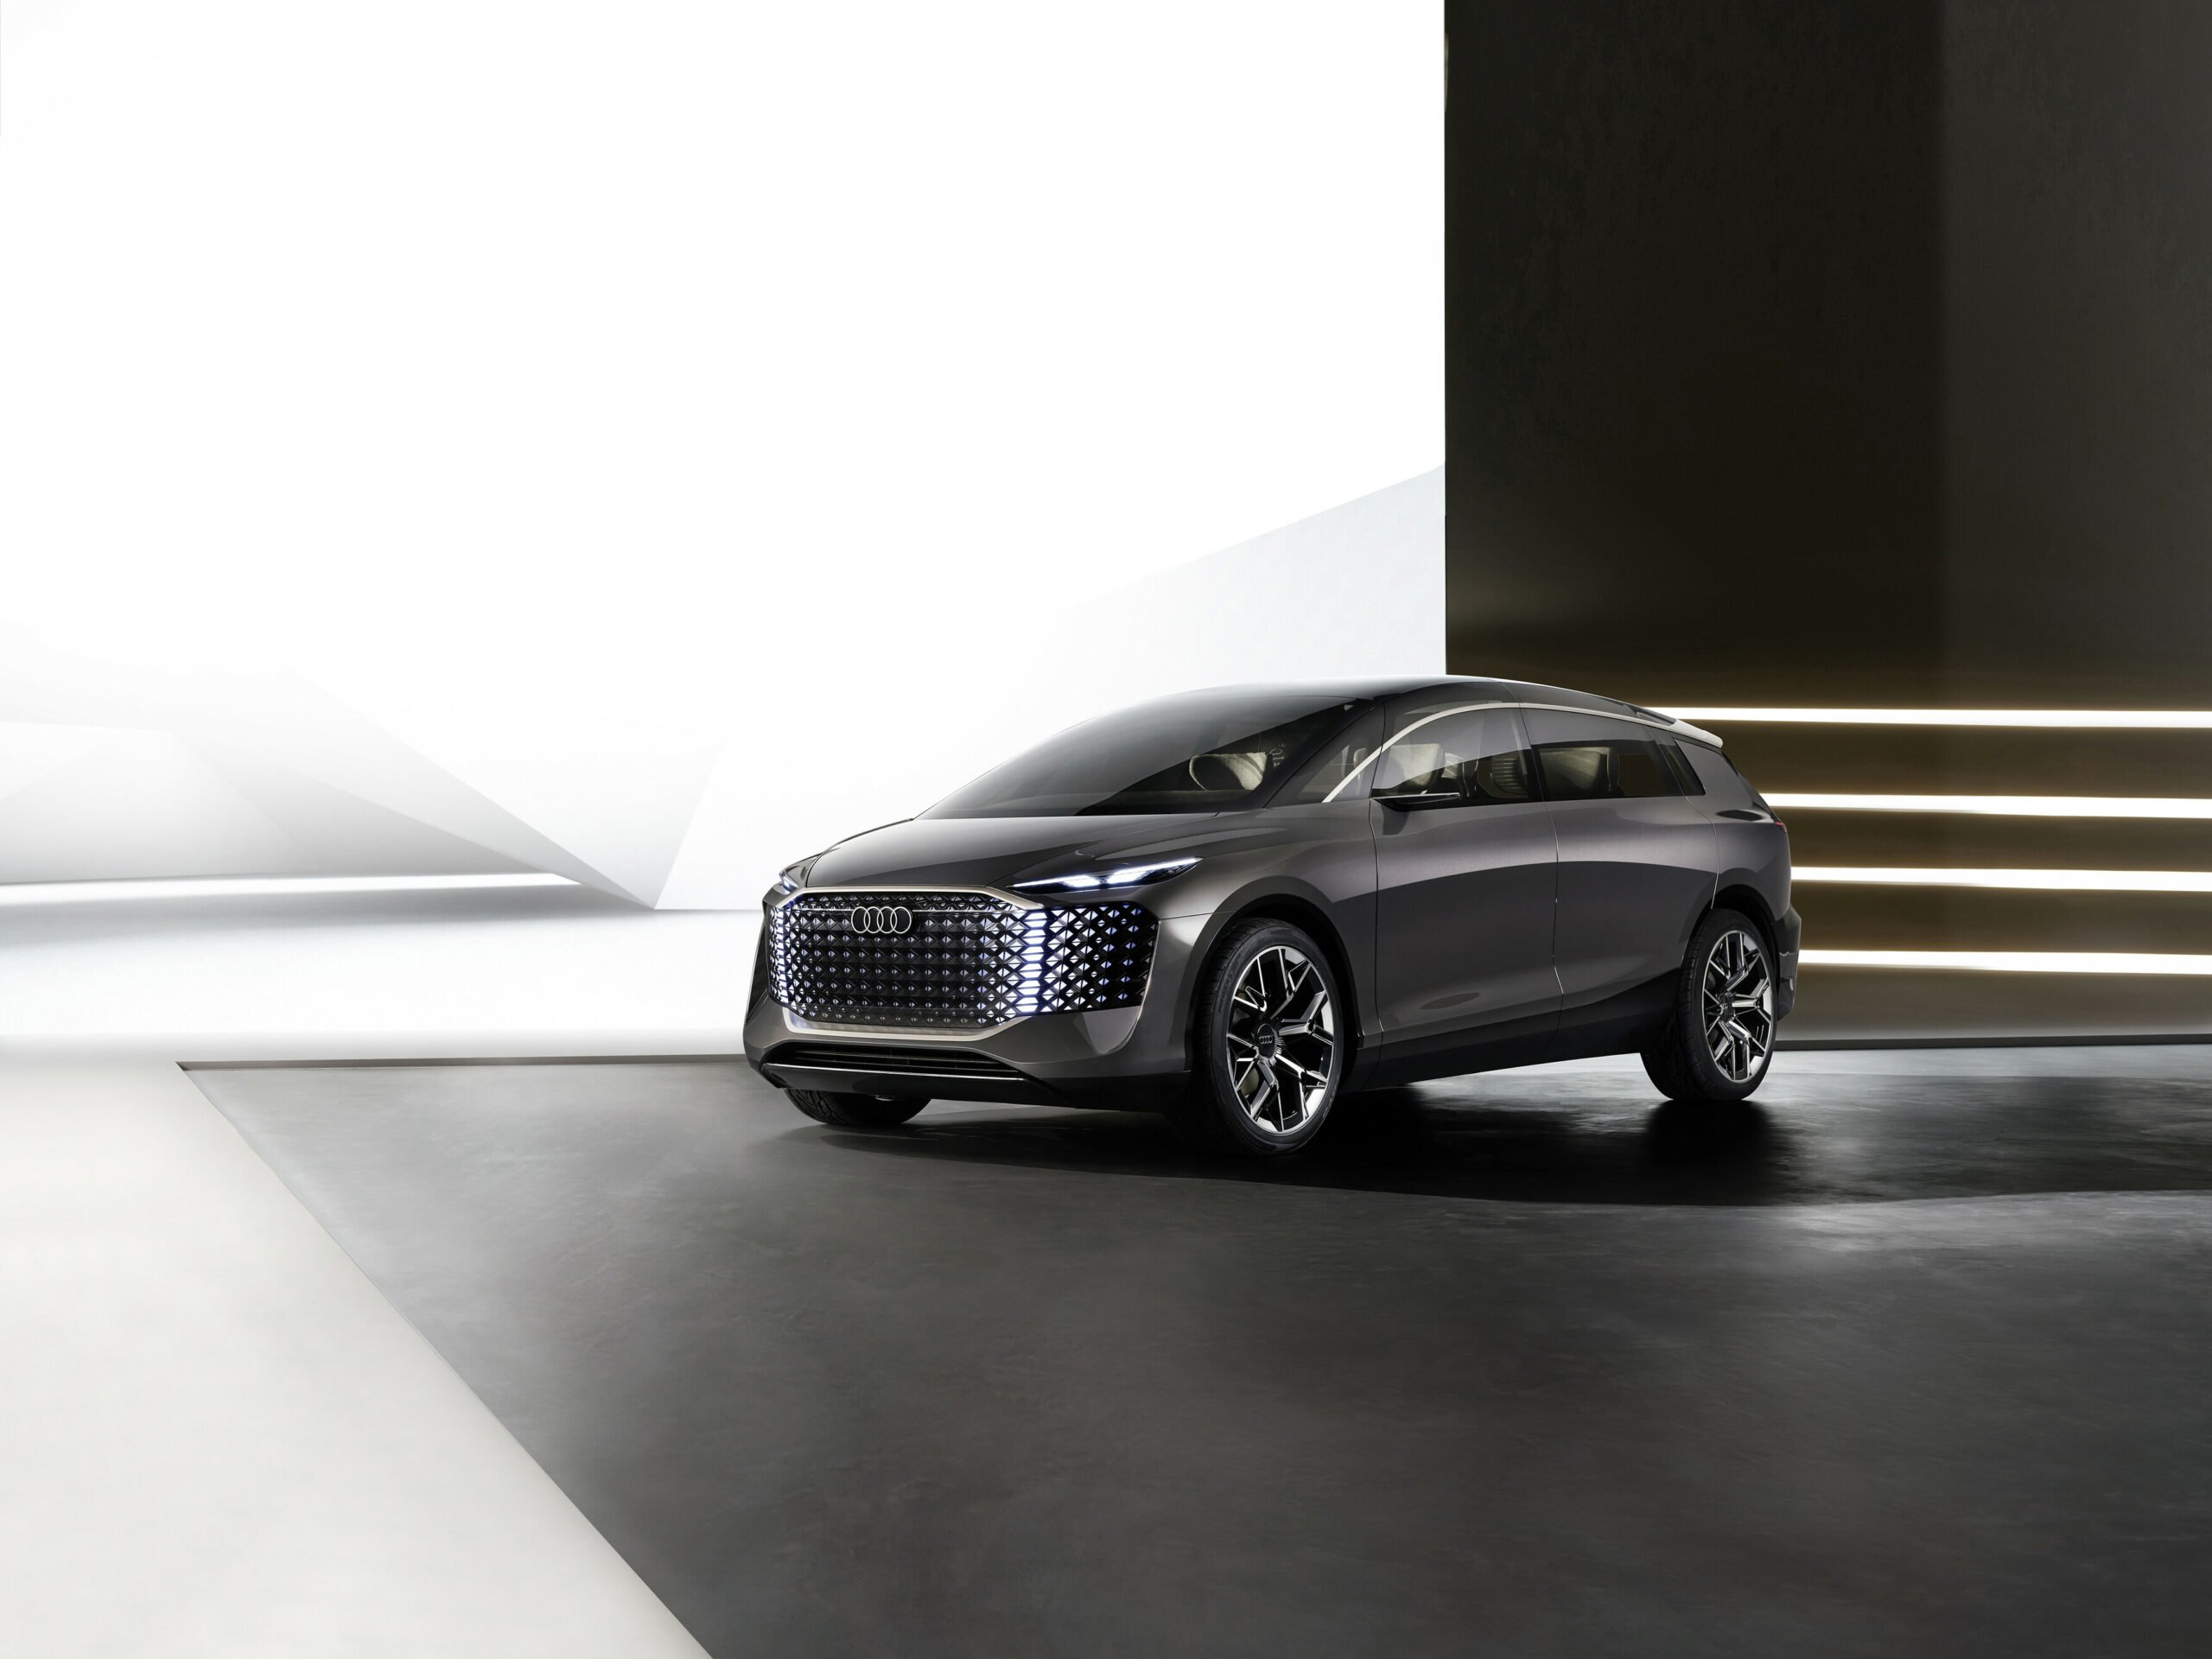 Audi urbansphere designed from the inside out for urban travel